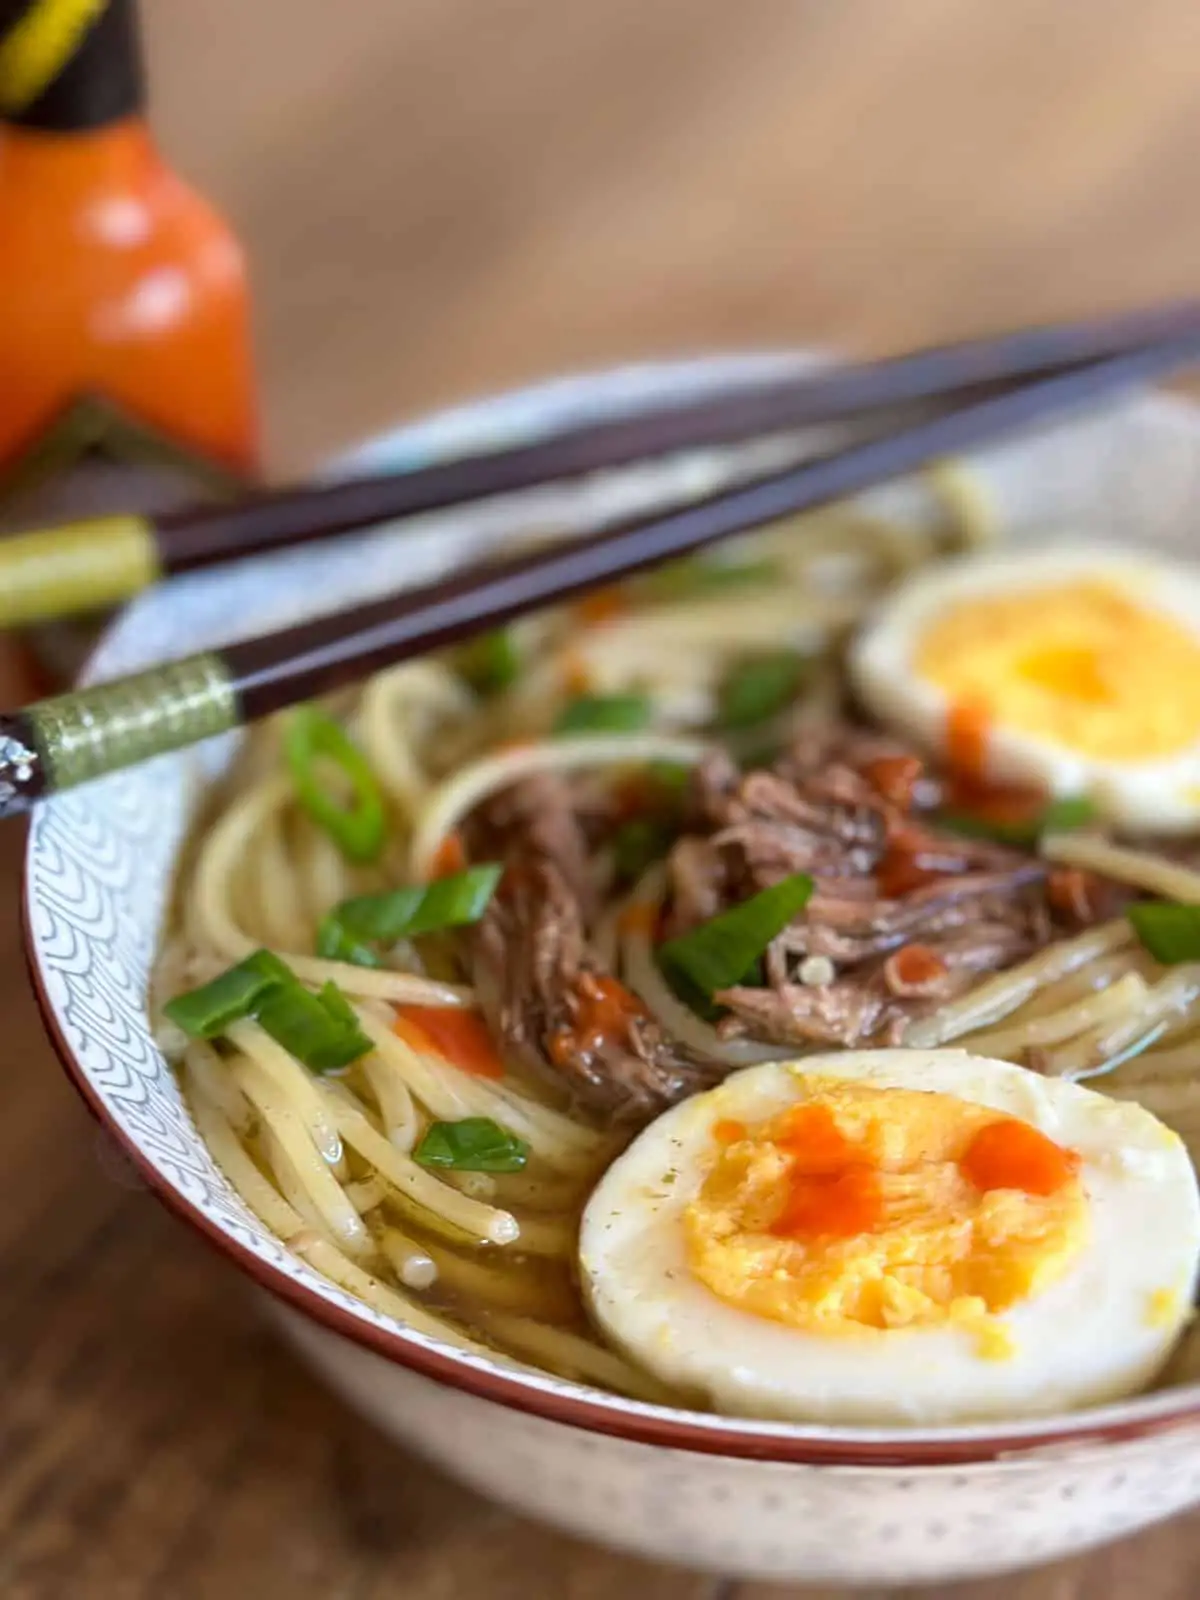 Shredded beef and noodles in a beef broth with hard boiled eggs which have been halved and green onions garnishing the noodle soup which was placed in a soup bowl with chopsticks resting on the bowl with a bottle of Tabasco in the background and splashes of Tabasco on the soup.